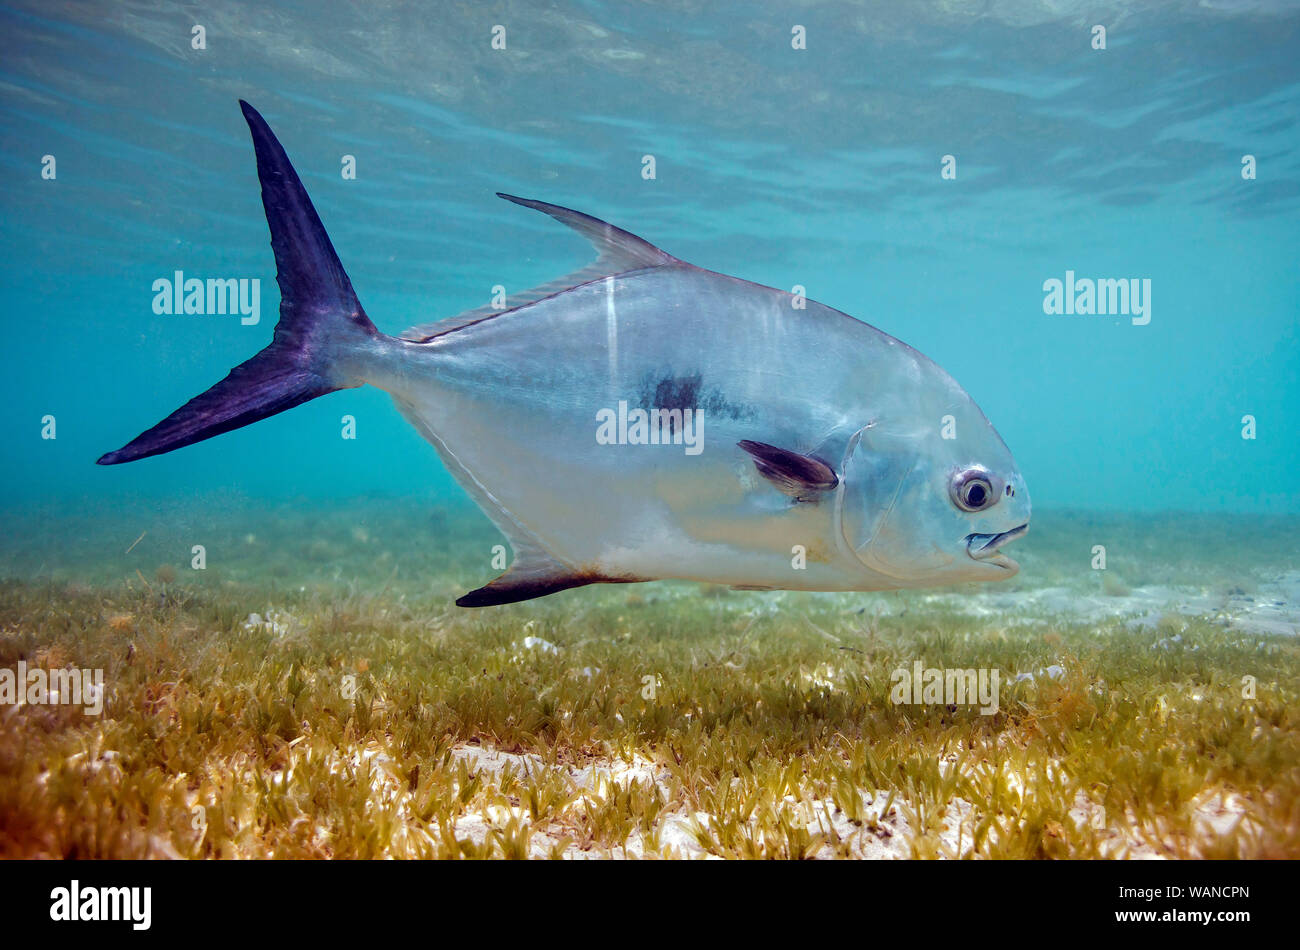 A permit swims above the sea grasses in Maho Bay, part of Virgin Islands National Park, on the island of St. John in the U.S. Virgin Islands. Stock Photo